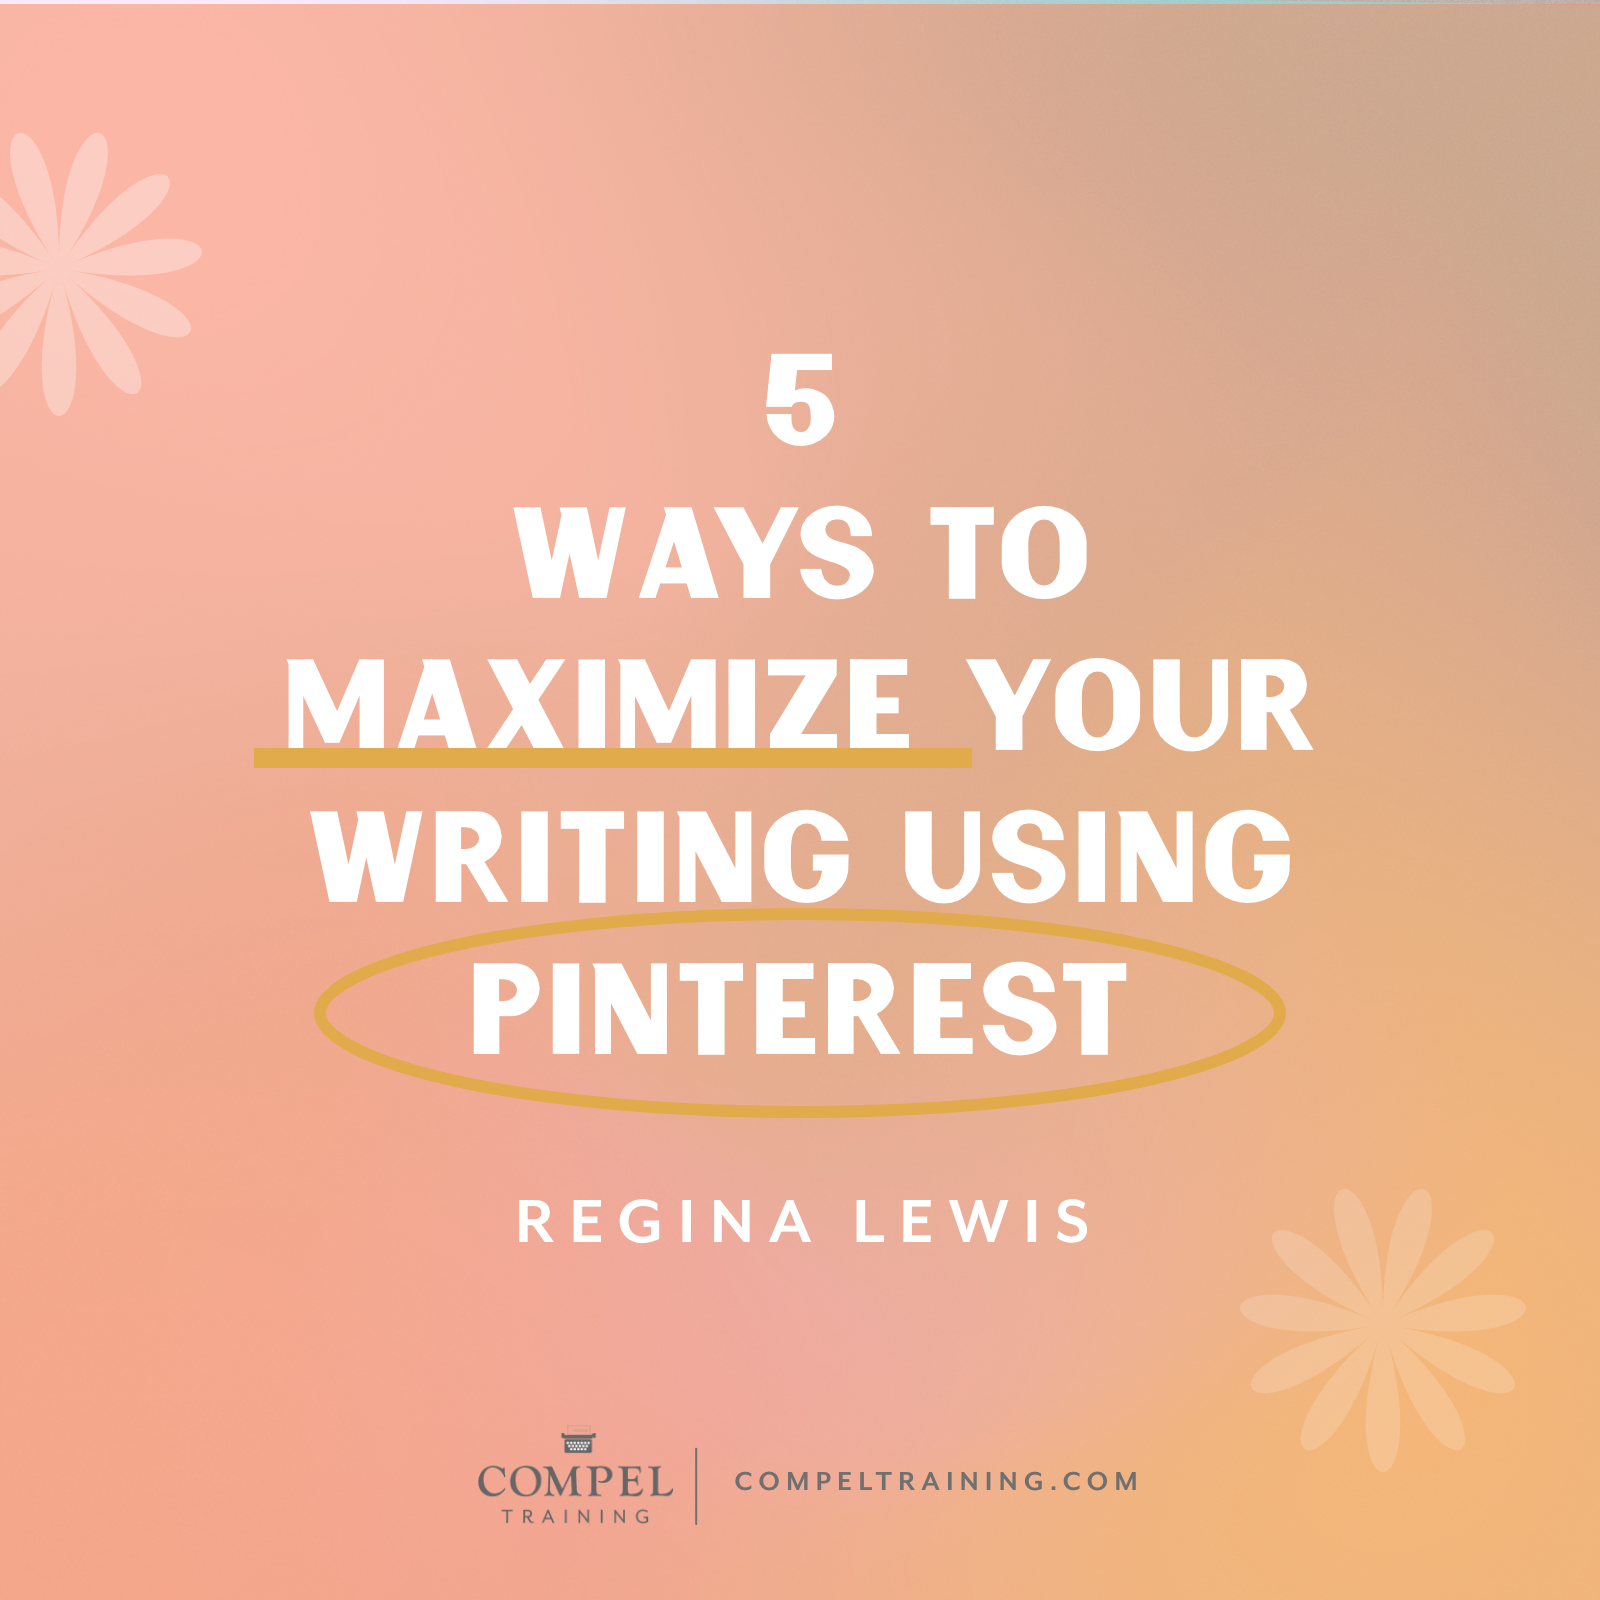 To all content creators, here’s a question! Have you considered Pinterest? Many writers don’t typically think of Pinterest when they’re sharing their work on the other popular social media platforms such as Facebook. The truth is Pinterest might just be the platform you didn’t know you needed! Here are 5 helpful ways to utilize Pinterest that you won’t want to miss!